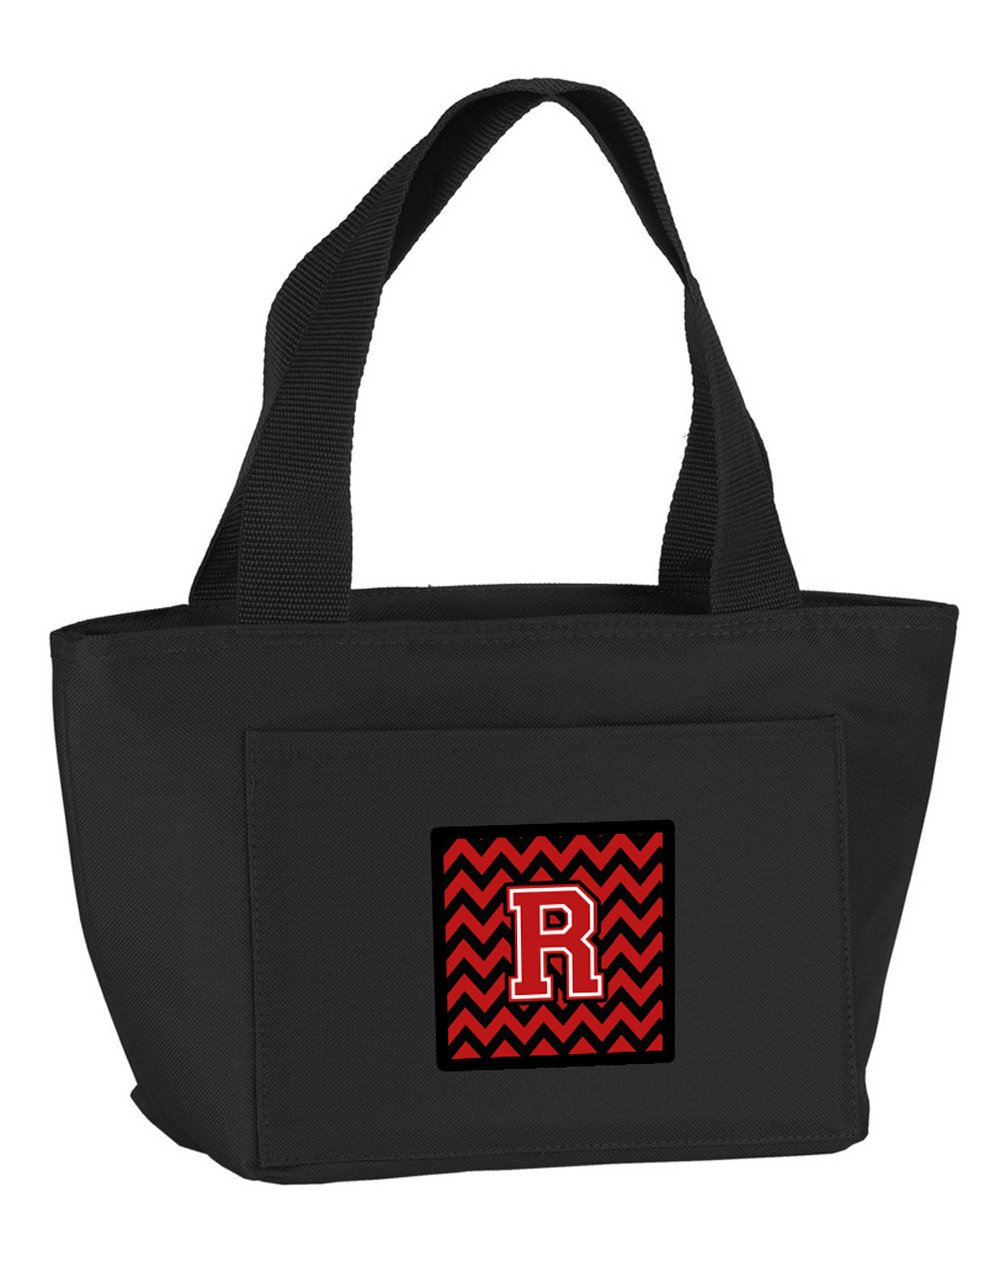 Letter R Chevron Black and Red   Lunch Bag CJ1047-RBK-8808 by Caroline's Treasures